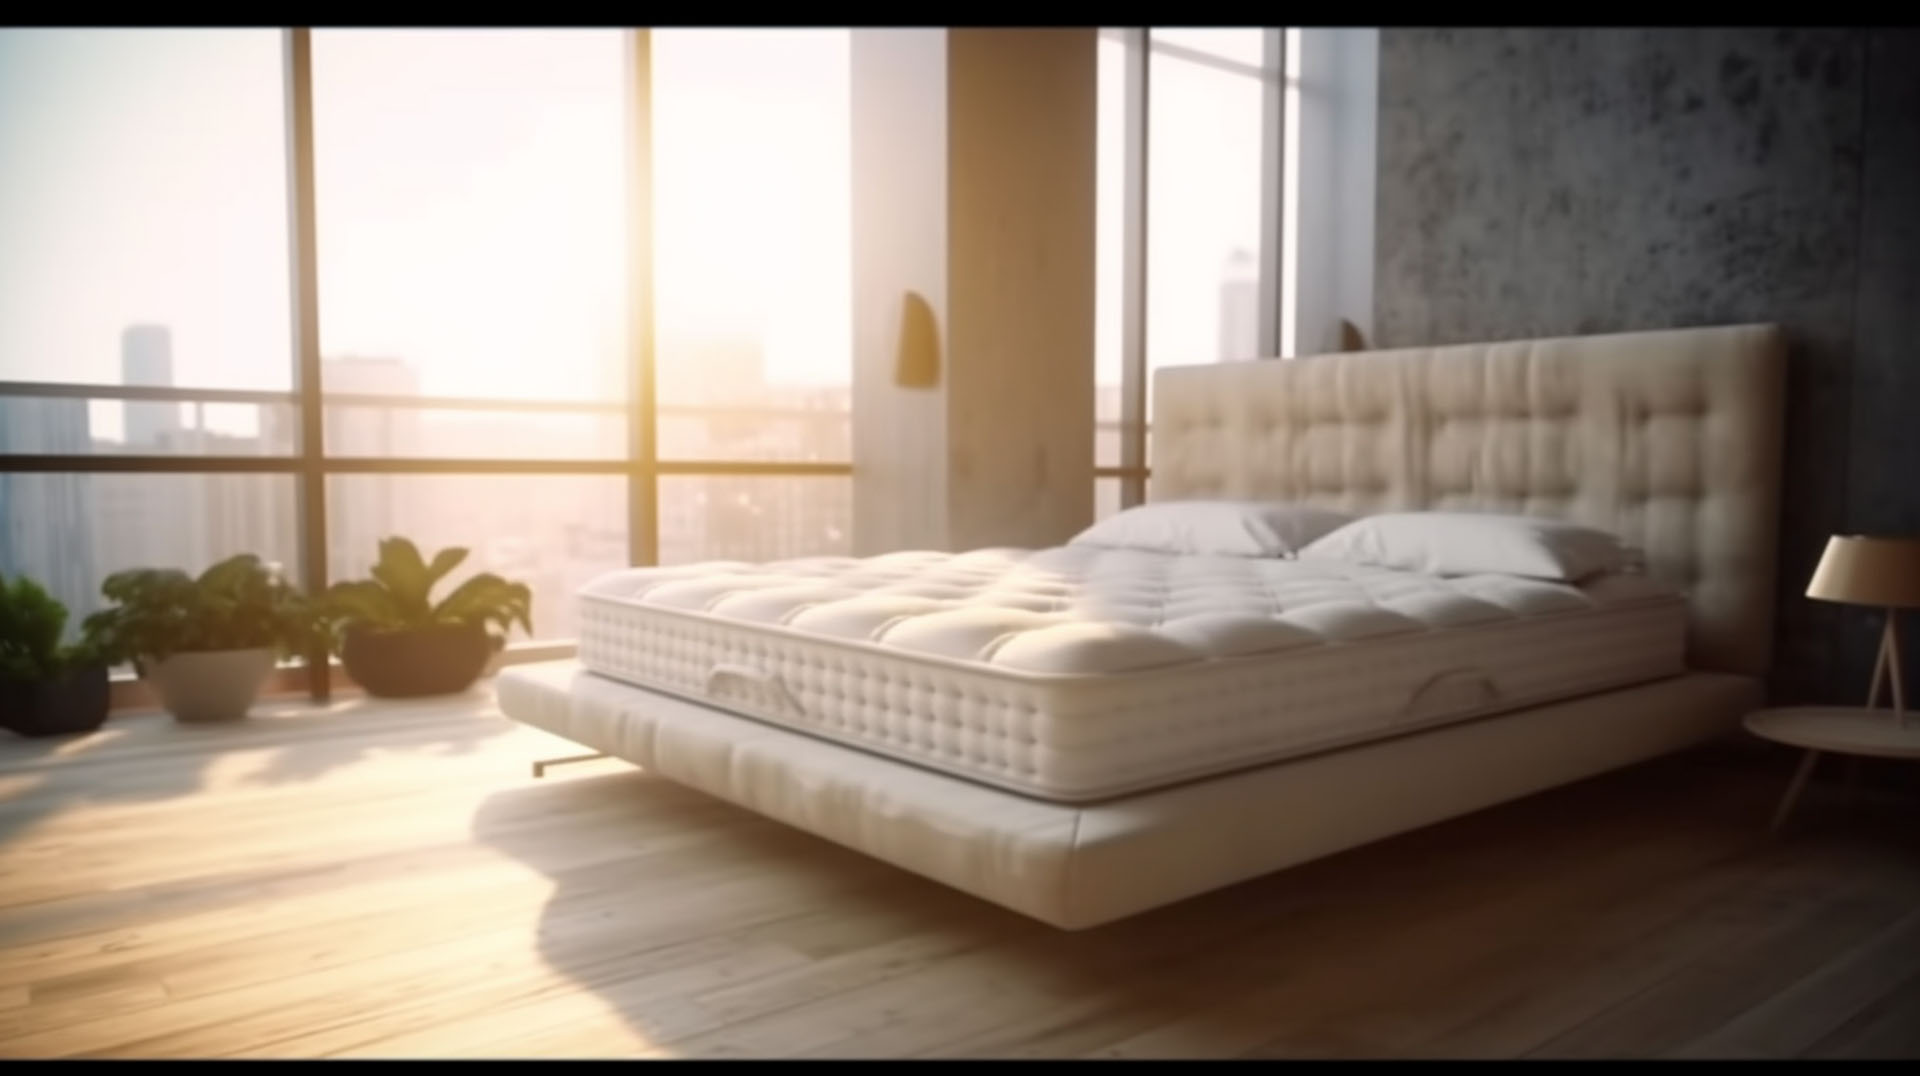 Omaha organic mattresses are the perfect way to get a good night's sleep without sacrificing comfort or your health